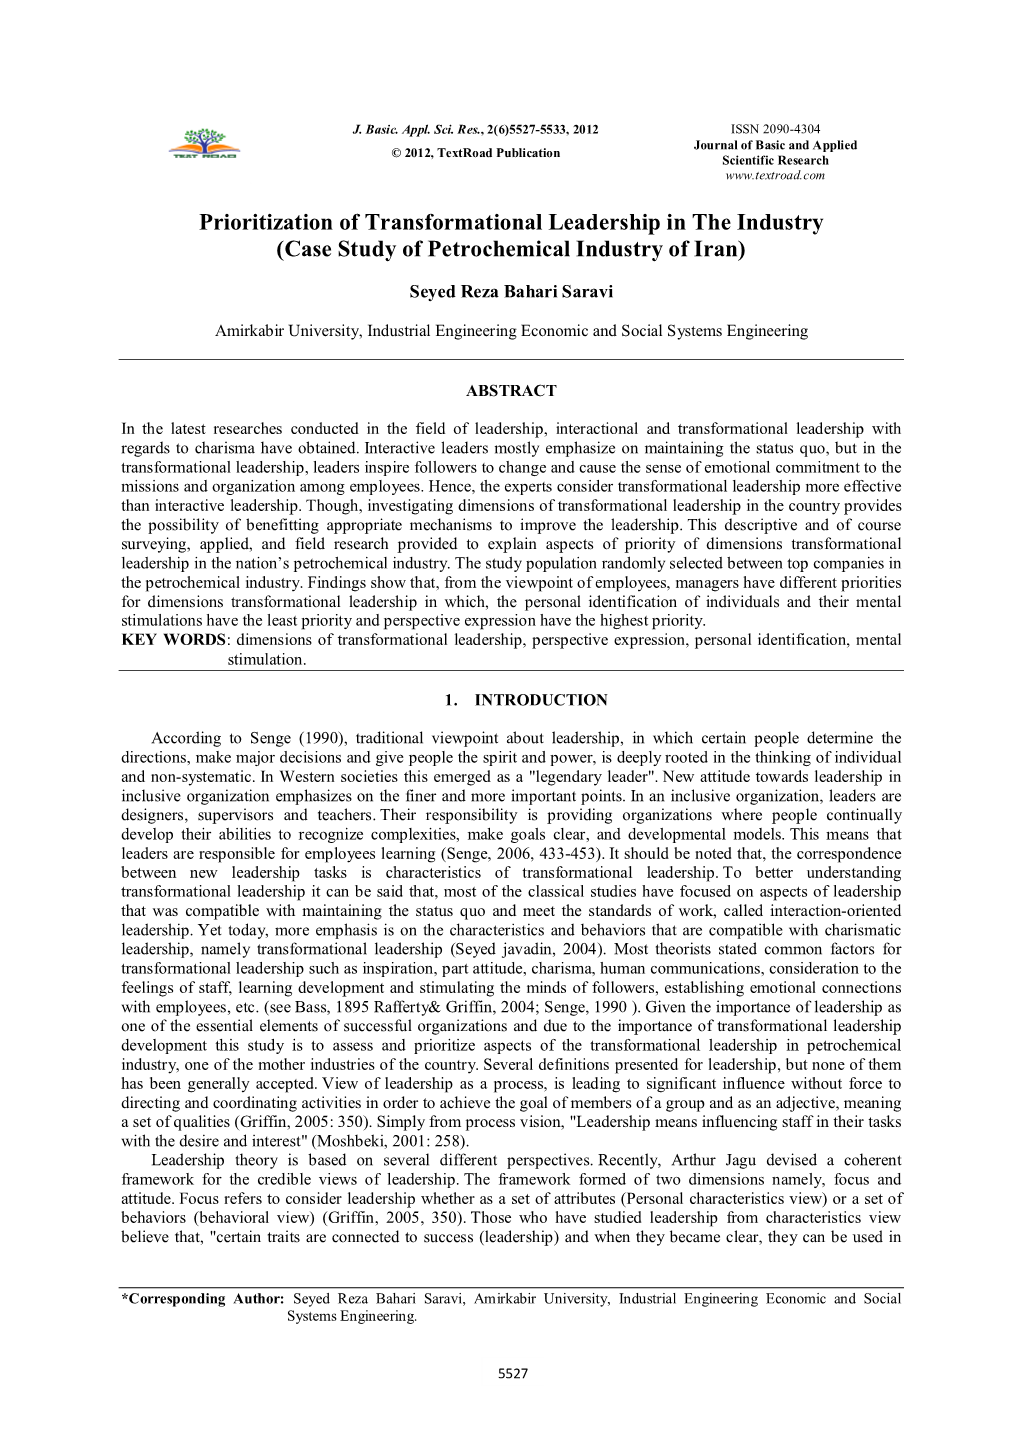 Prioritization of Transformational Leadership in the Industry (Case Study of Petrochemical Industry of Iran)